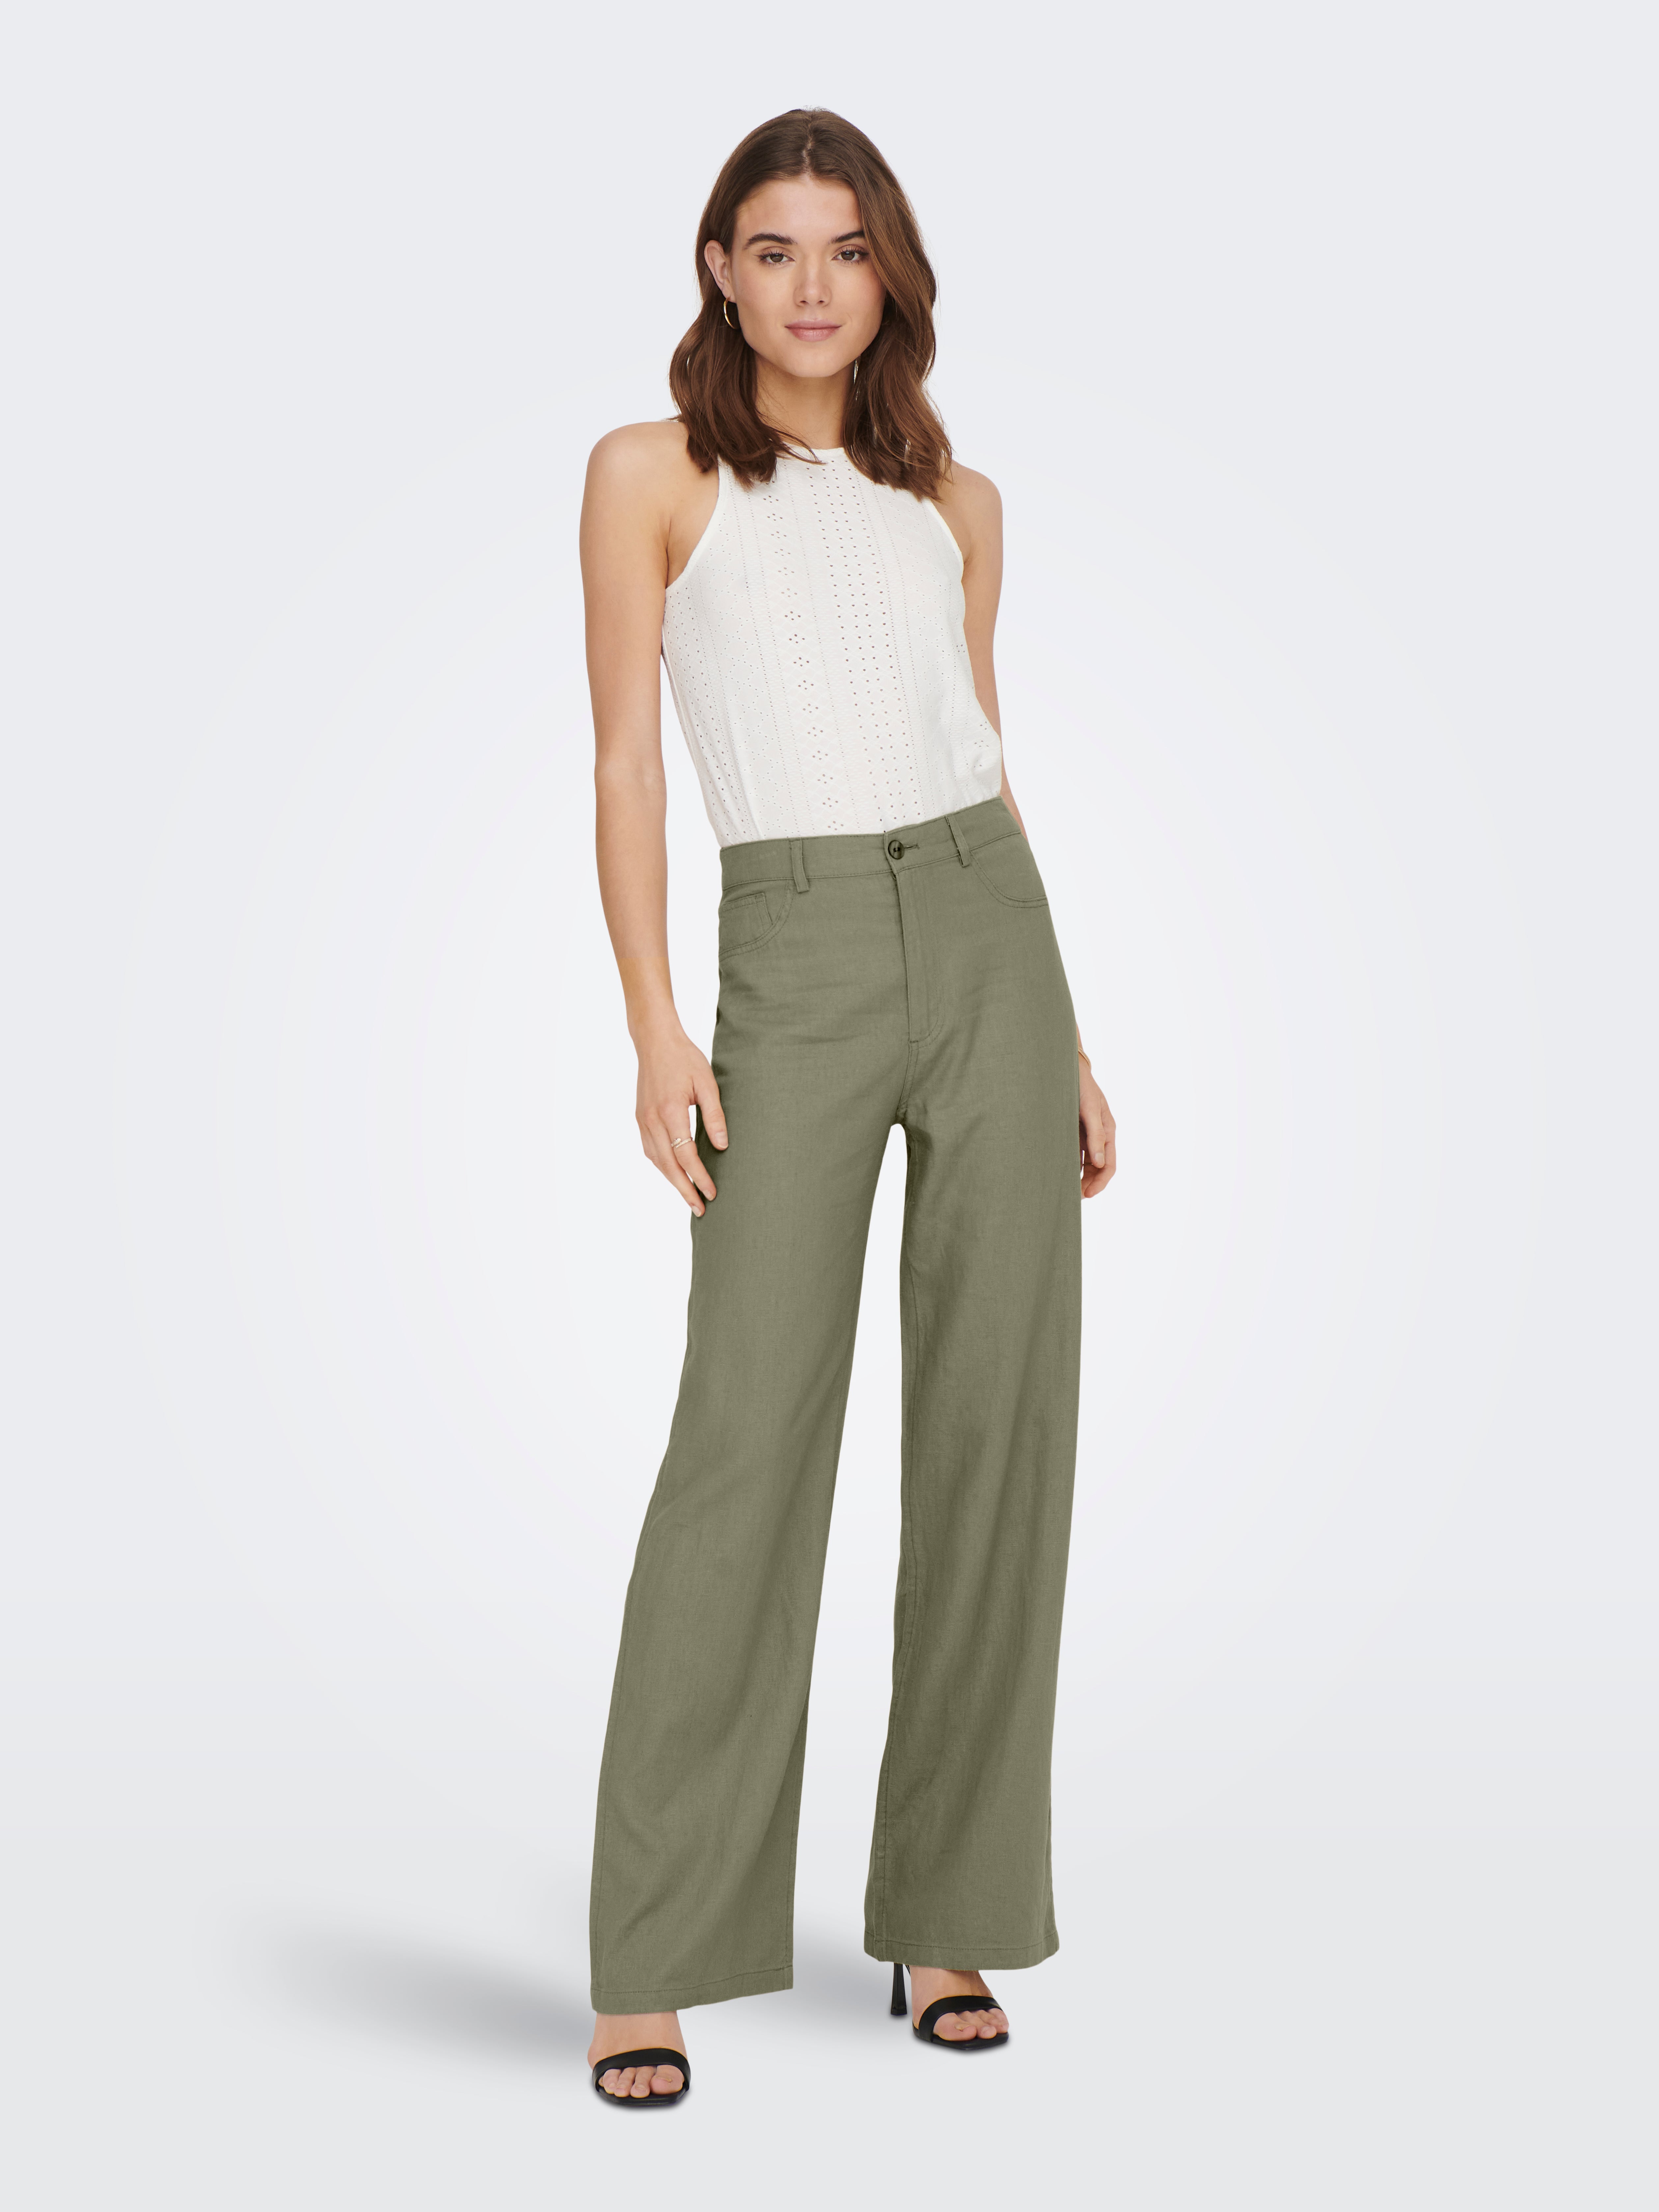 Looma Sequin Pants - High Waisted Super Wide Leg Pants in Silver | Showpo  USA